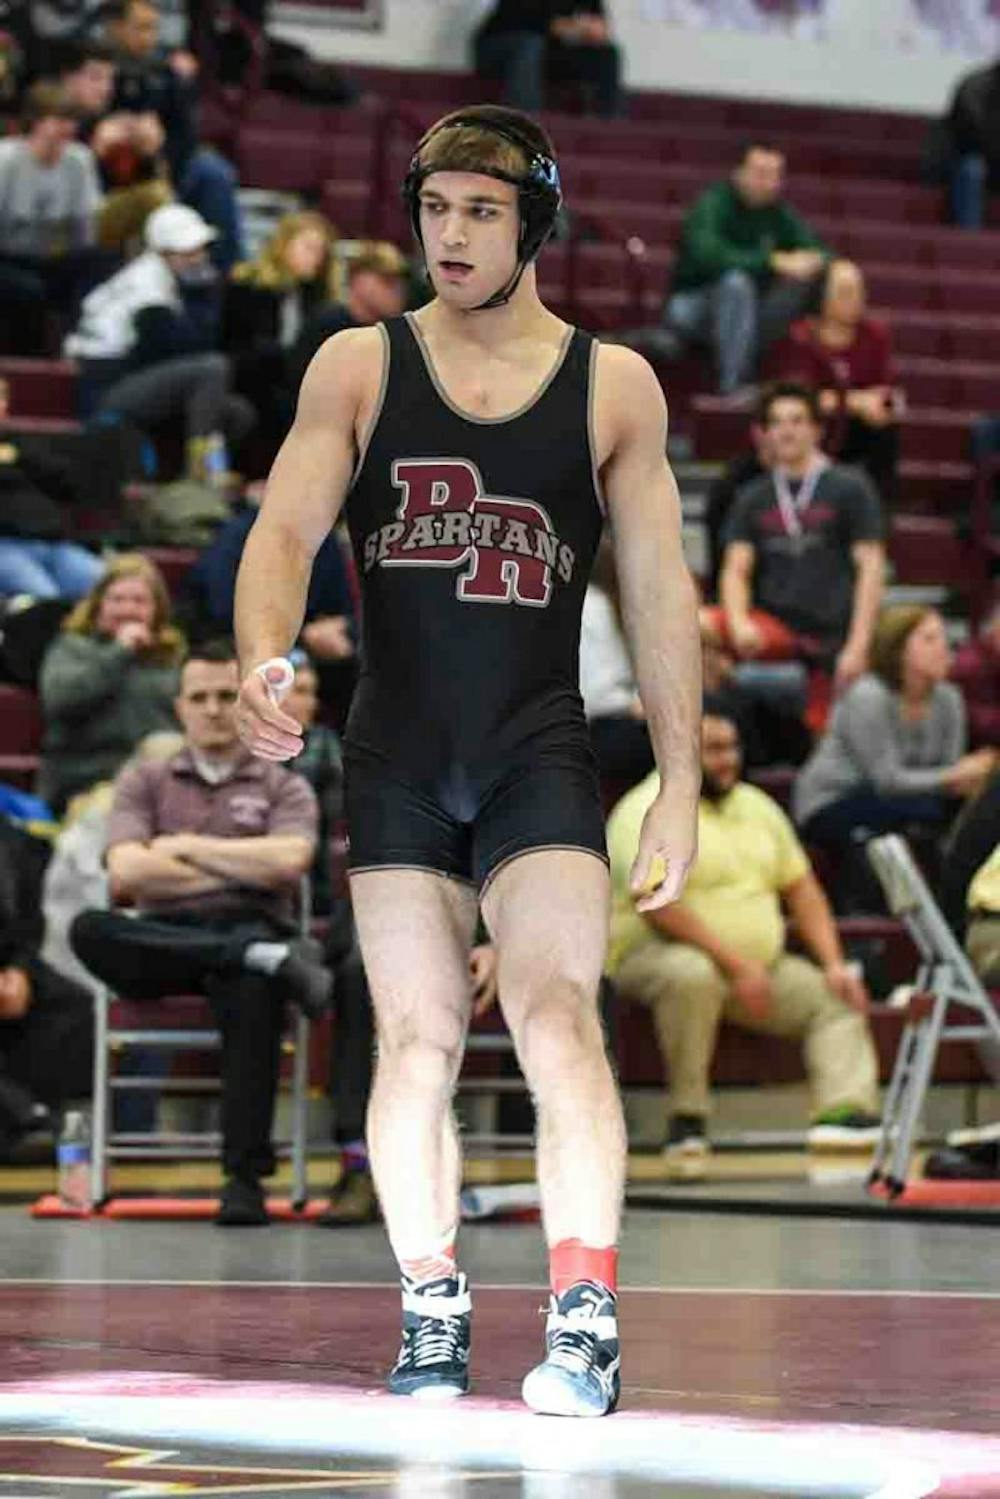 <p>Freshman wrestler Michael Battista maintains his confidence by envisioning his daily successes as a Cavalier.<br>
</p>